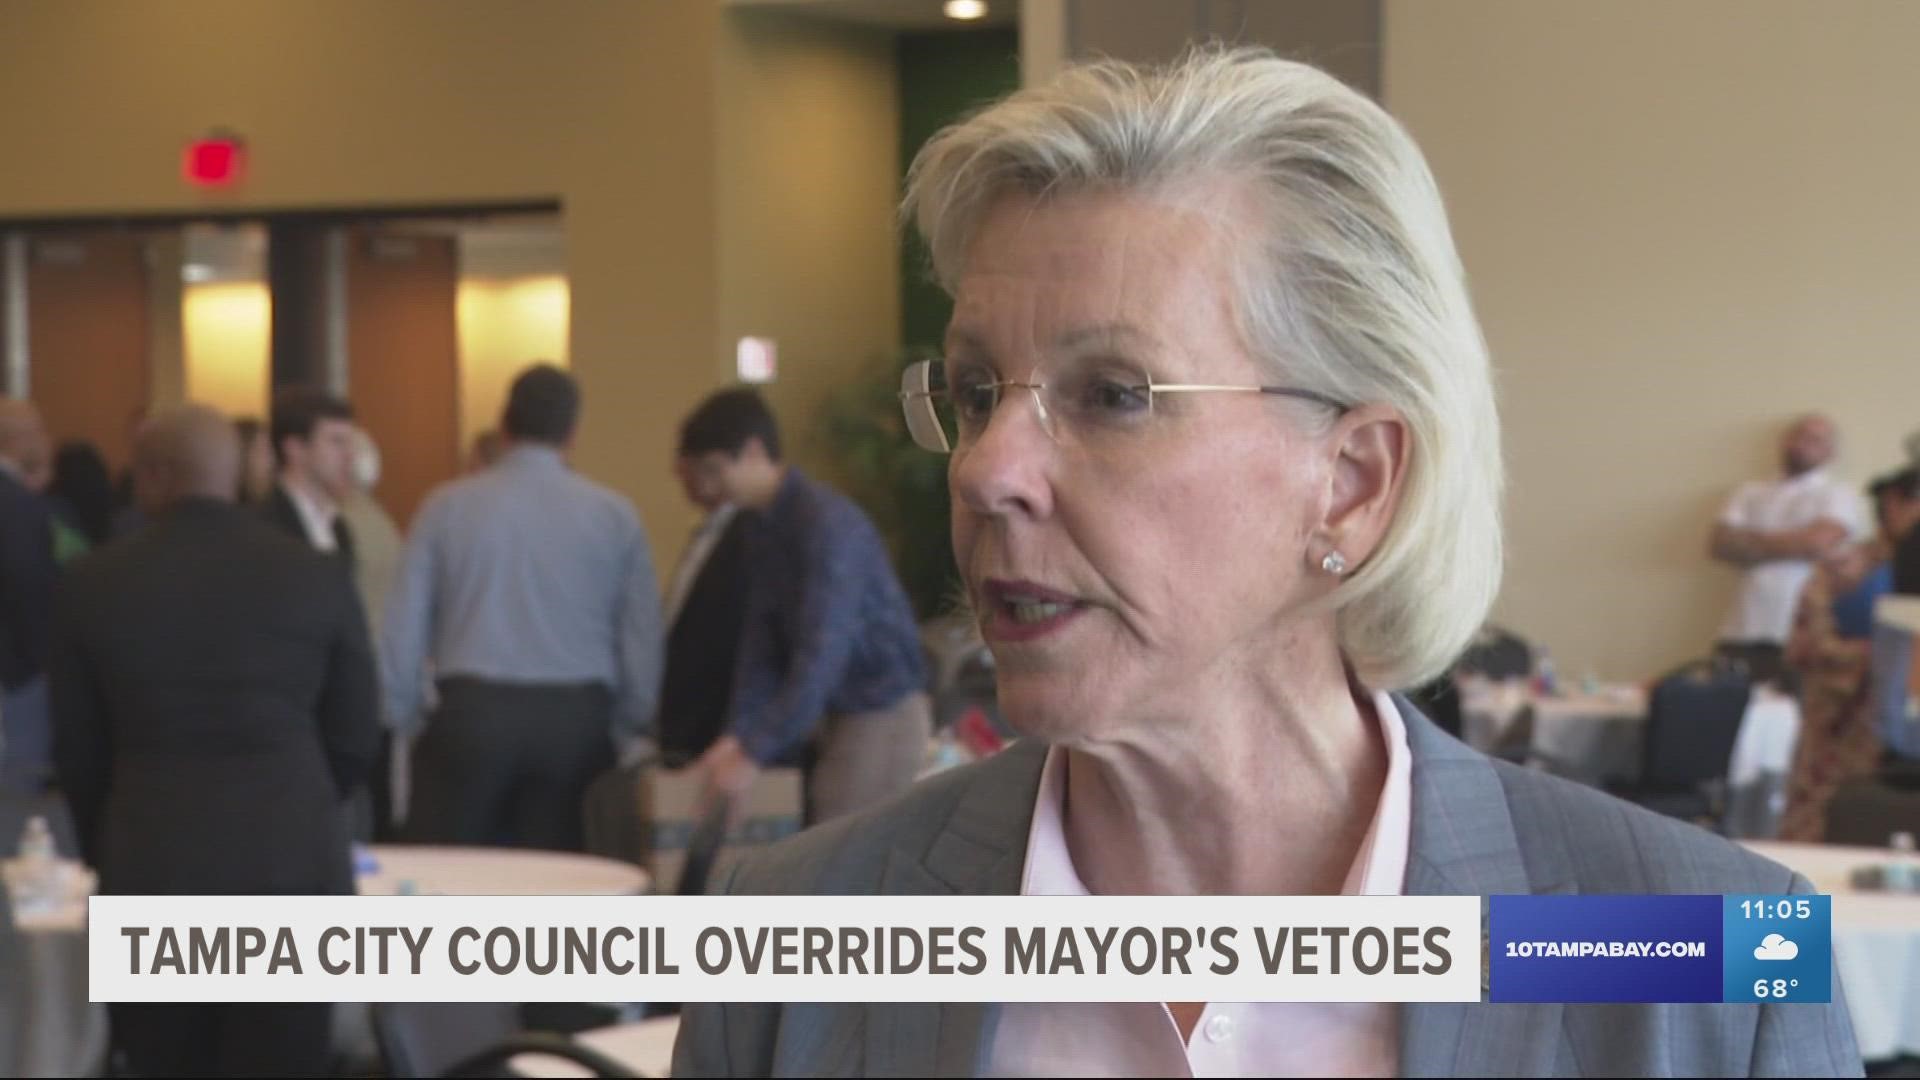 The council voted to override four of the five vetoes that Mayor Jane Castor announced earlier this week. They will now go to voters.